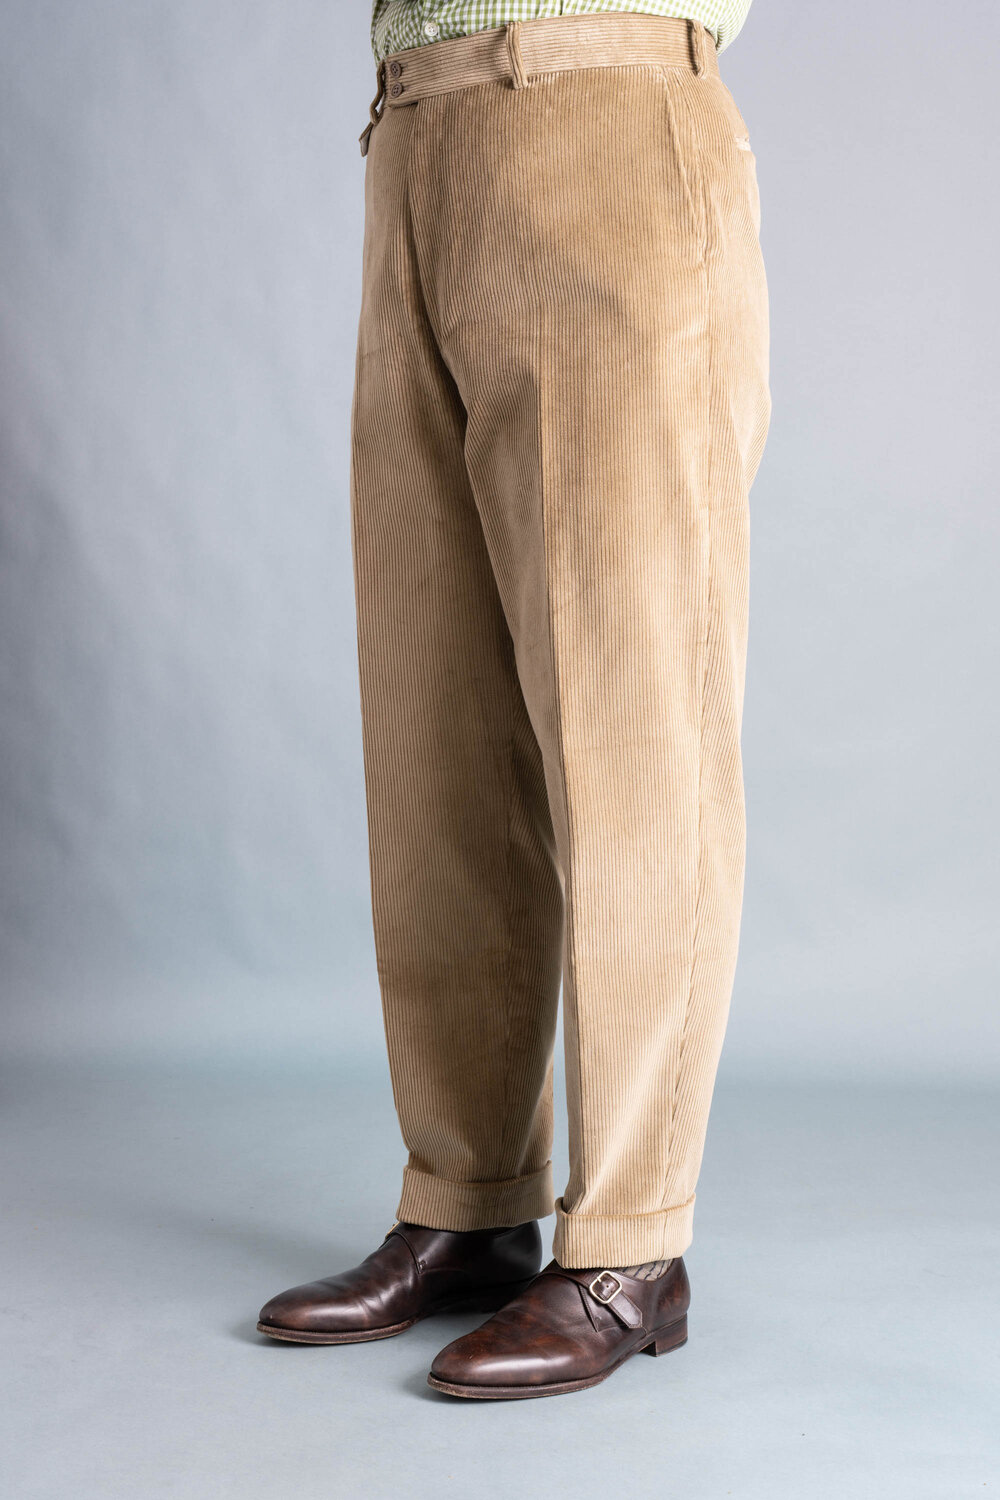 Left side angle front view of the Pale Taupe corduroy trousers-_R5_8834